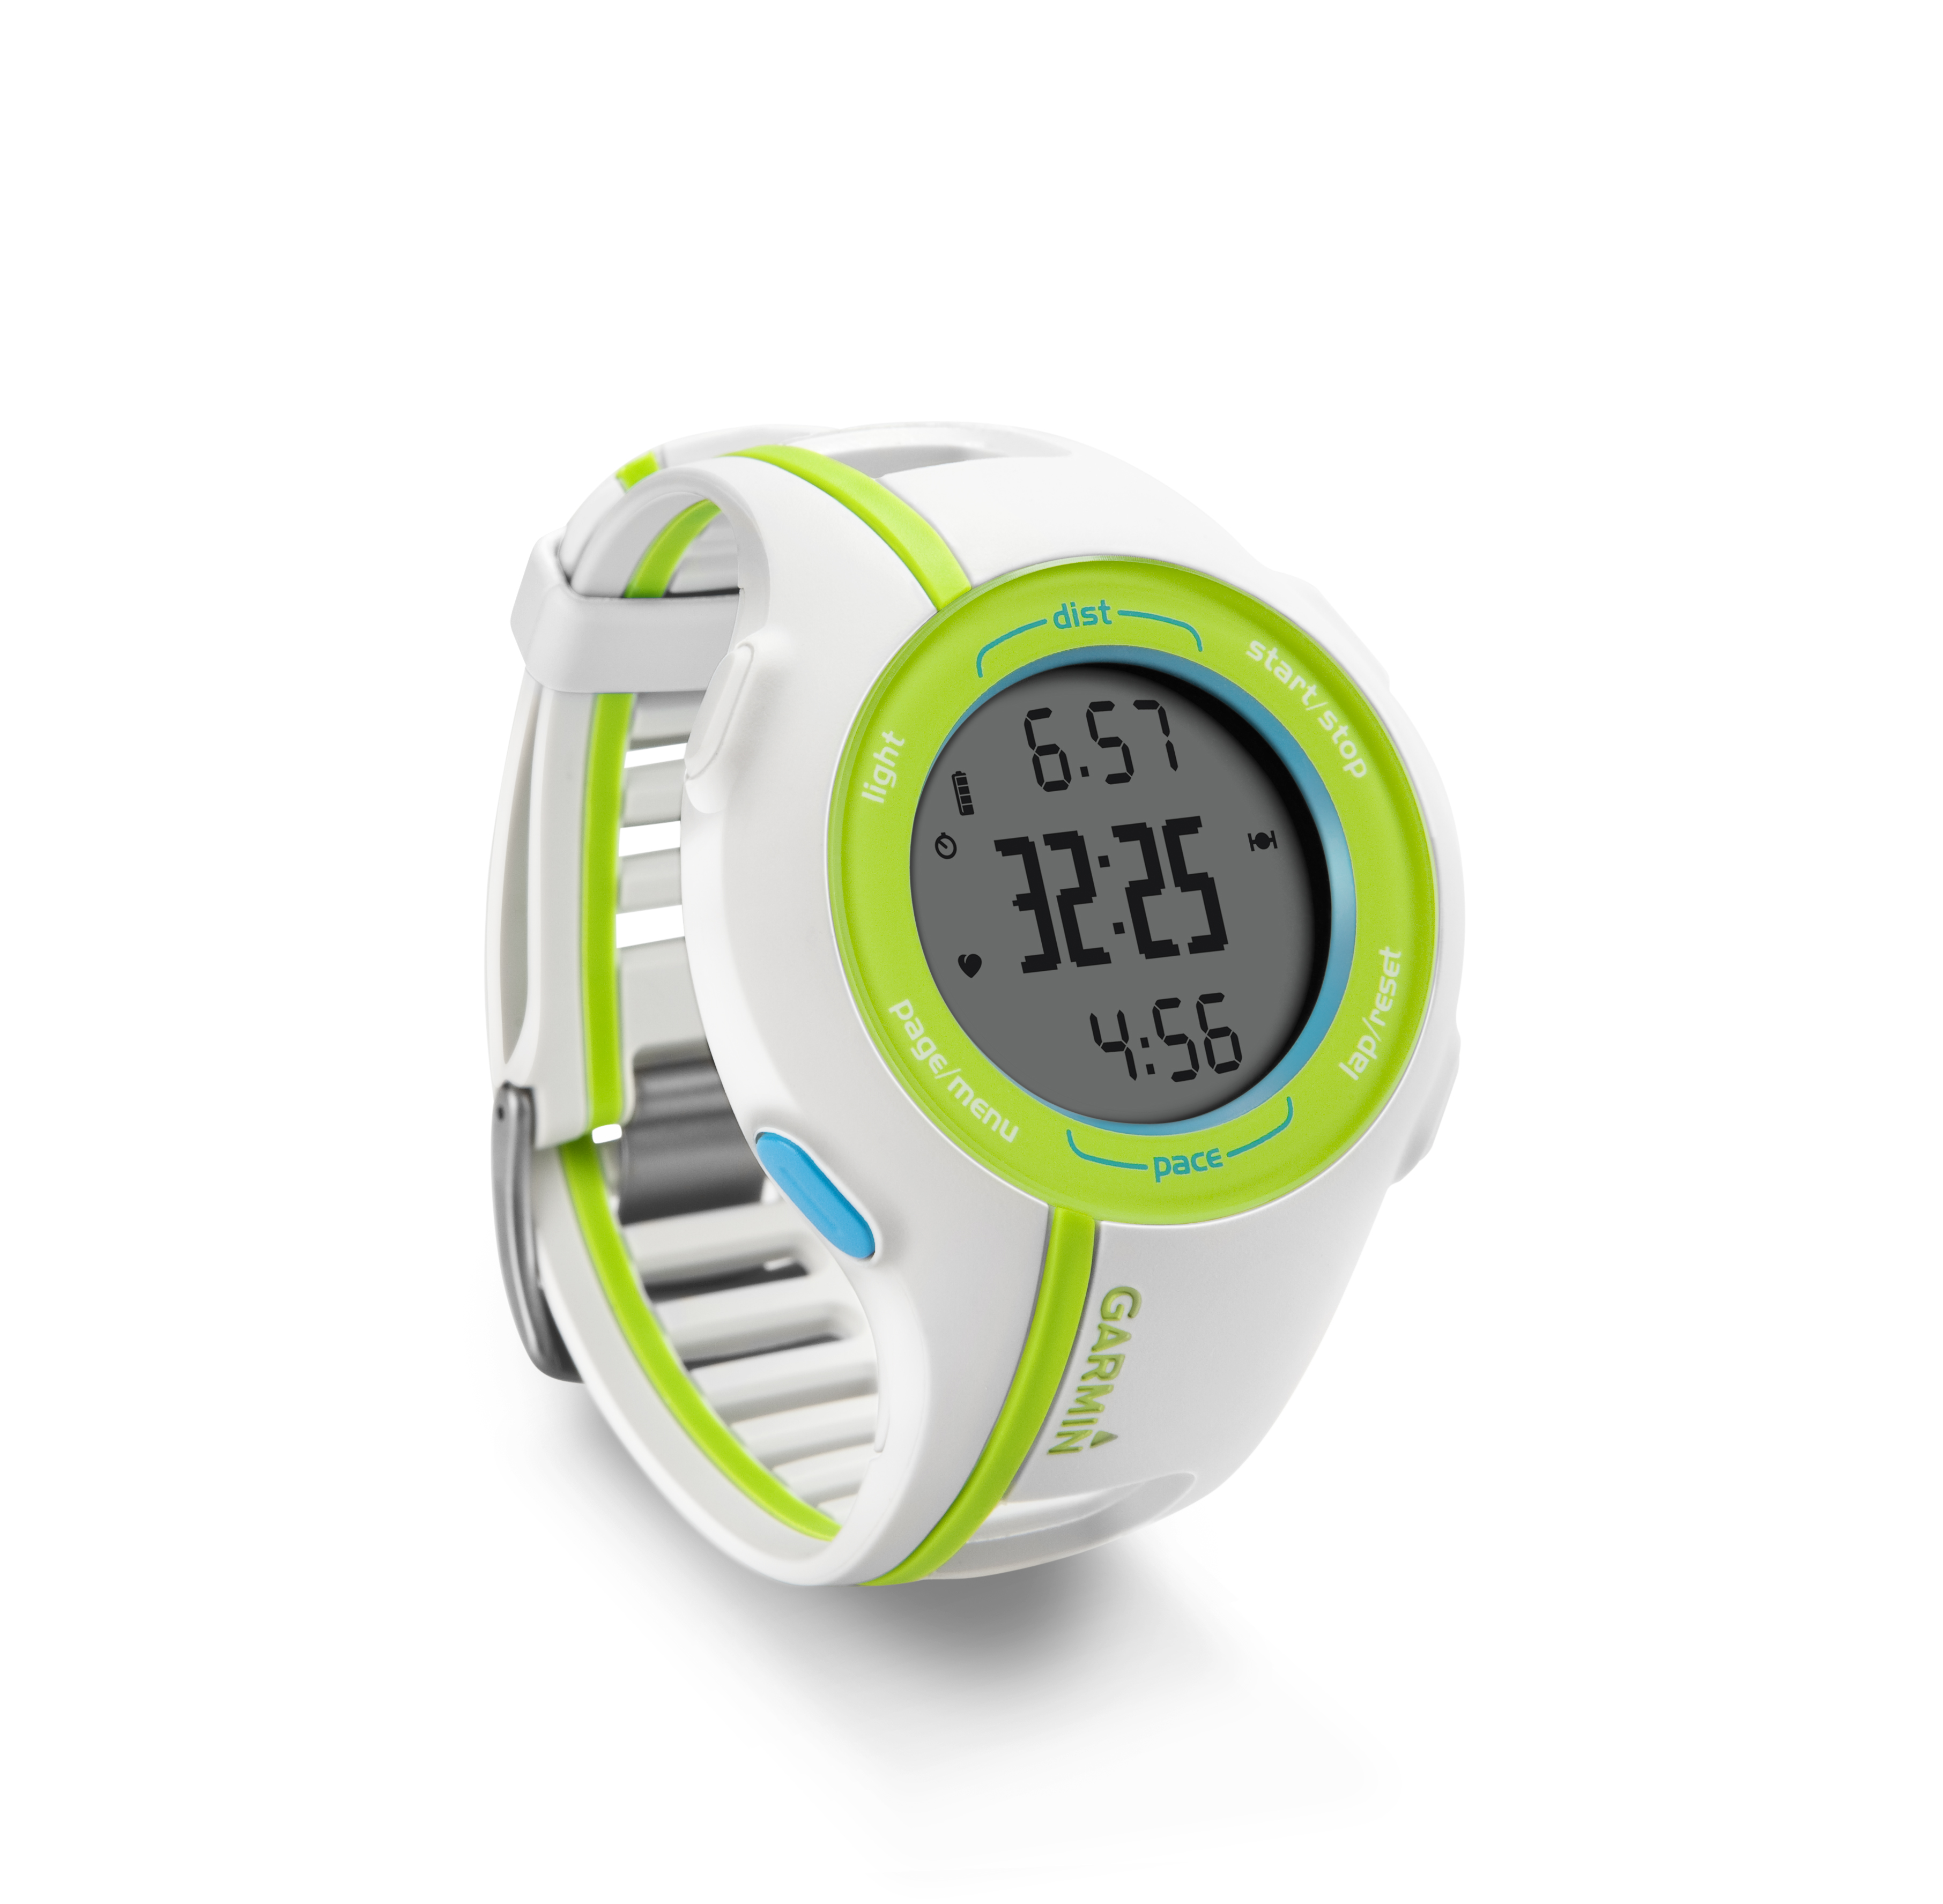 Stand out from the pack Garmin Special Edition Forerunner 210 & 610 Blog